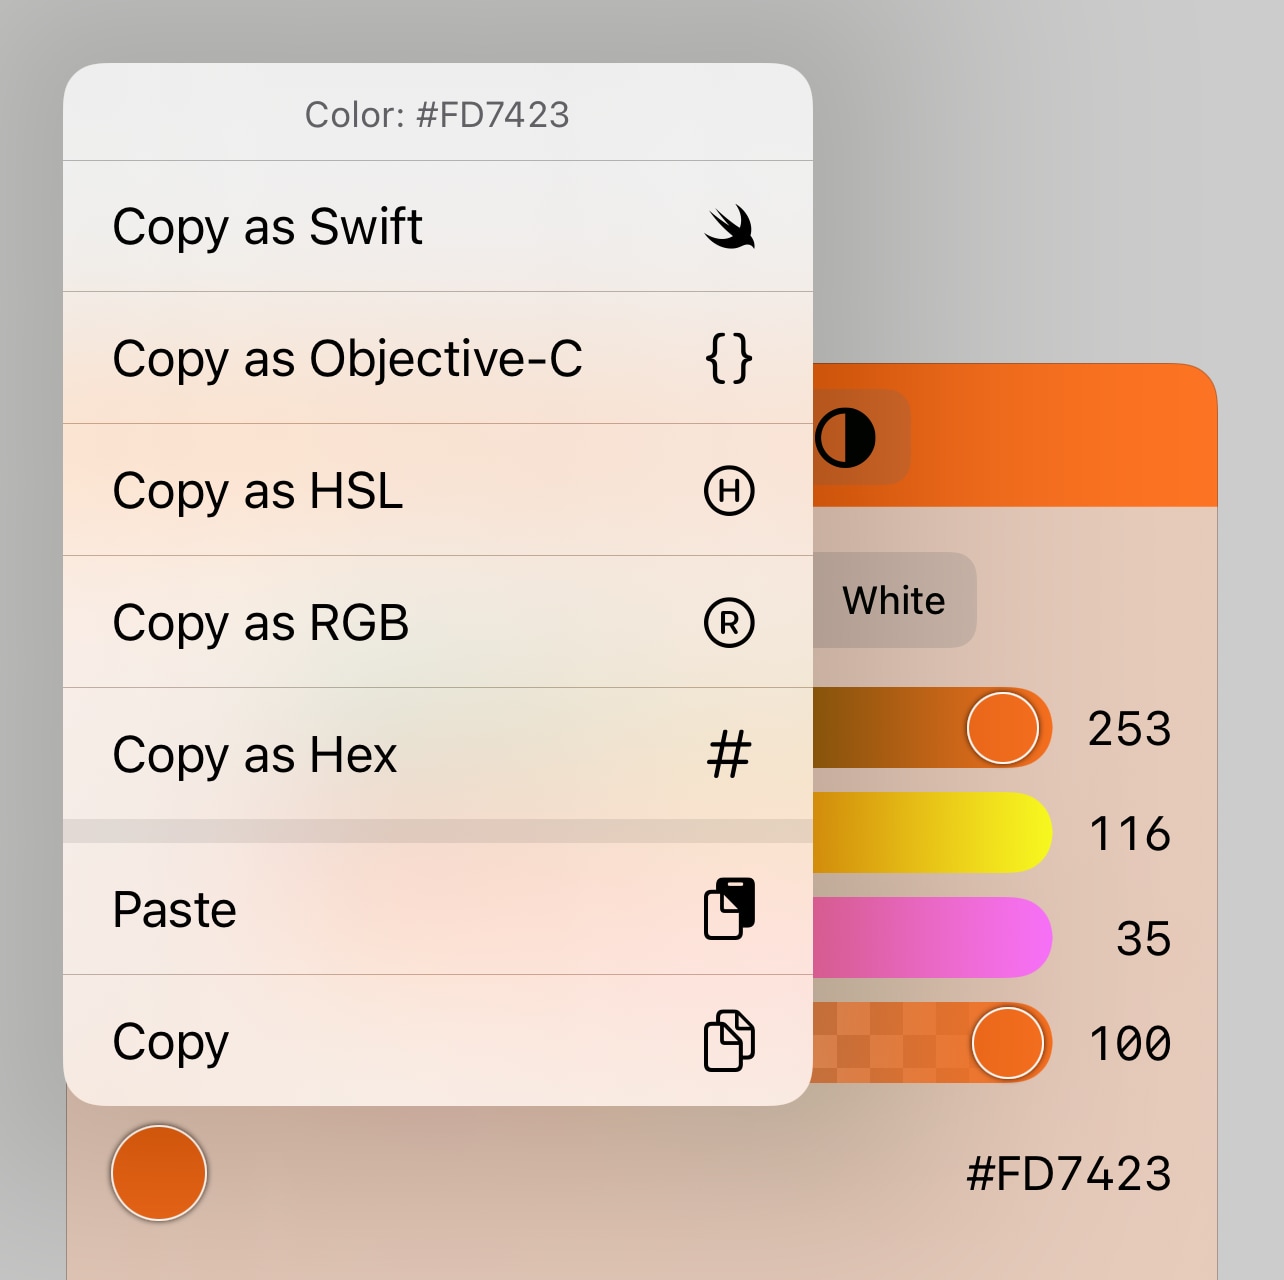 Alderis’s color context menu, allowing copying a color in hex, RGB, HSL, Objective-C, and Swift formats, or pasting a color.